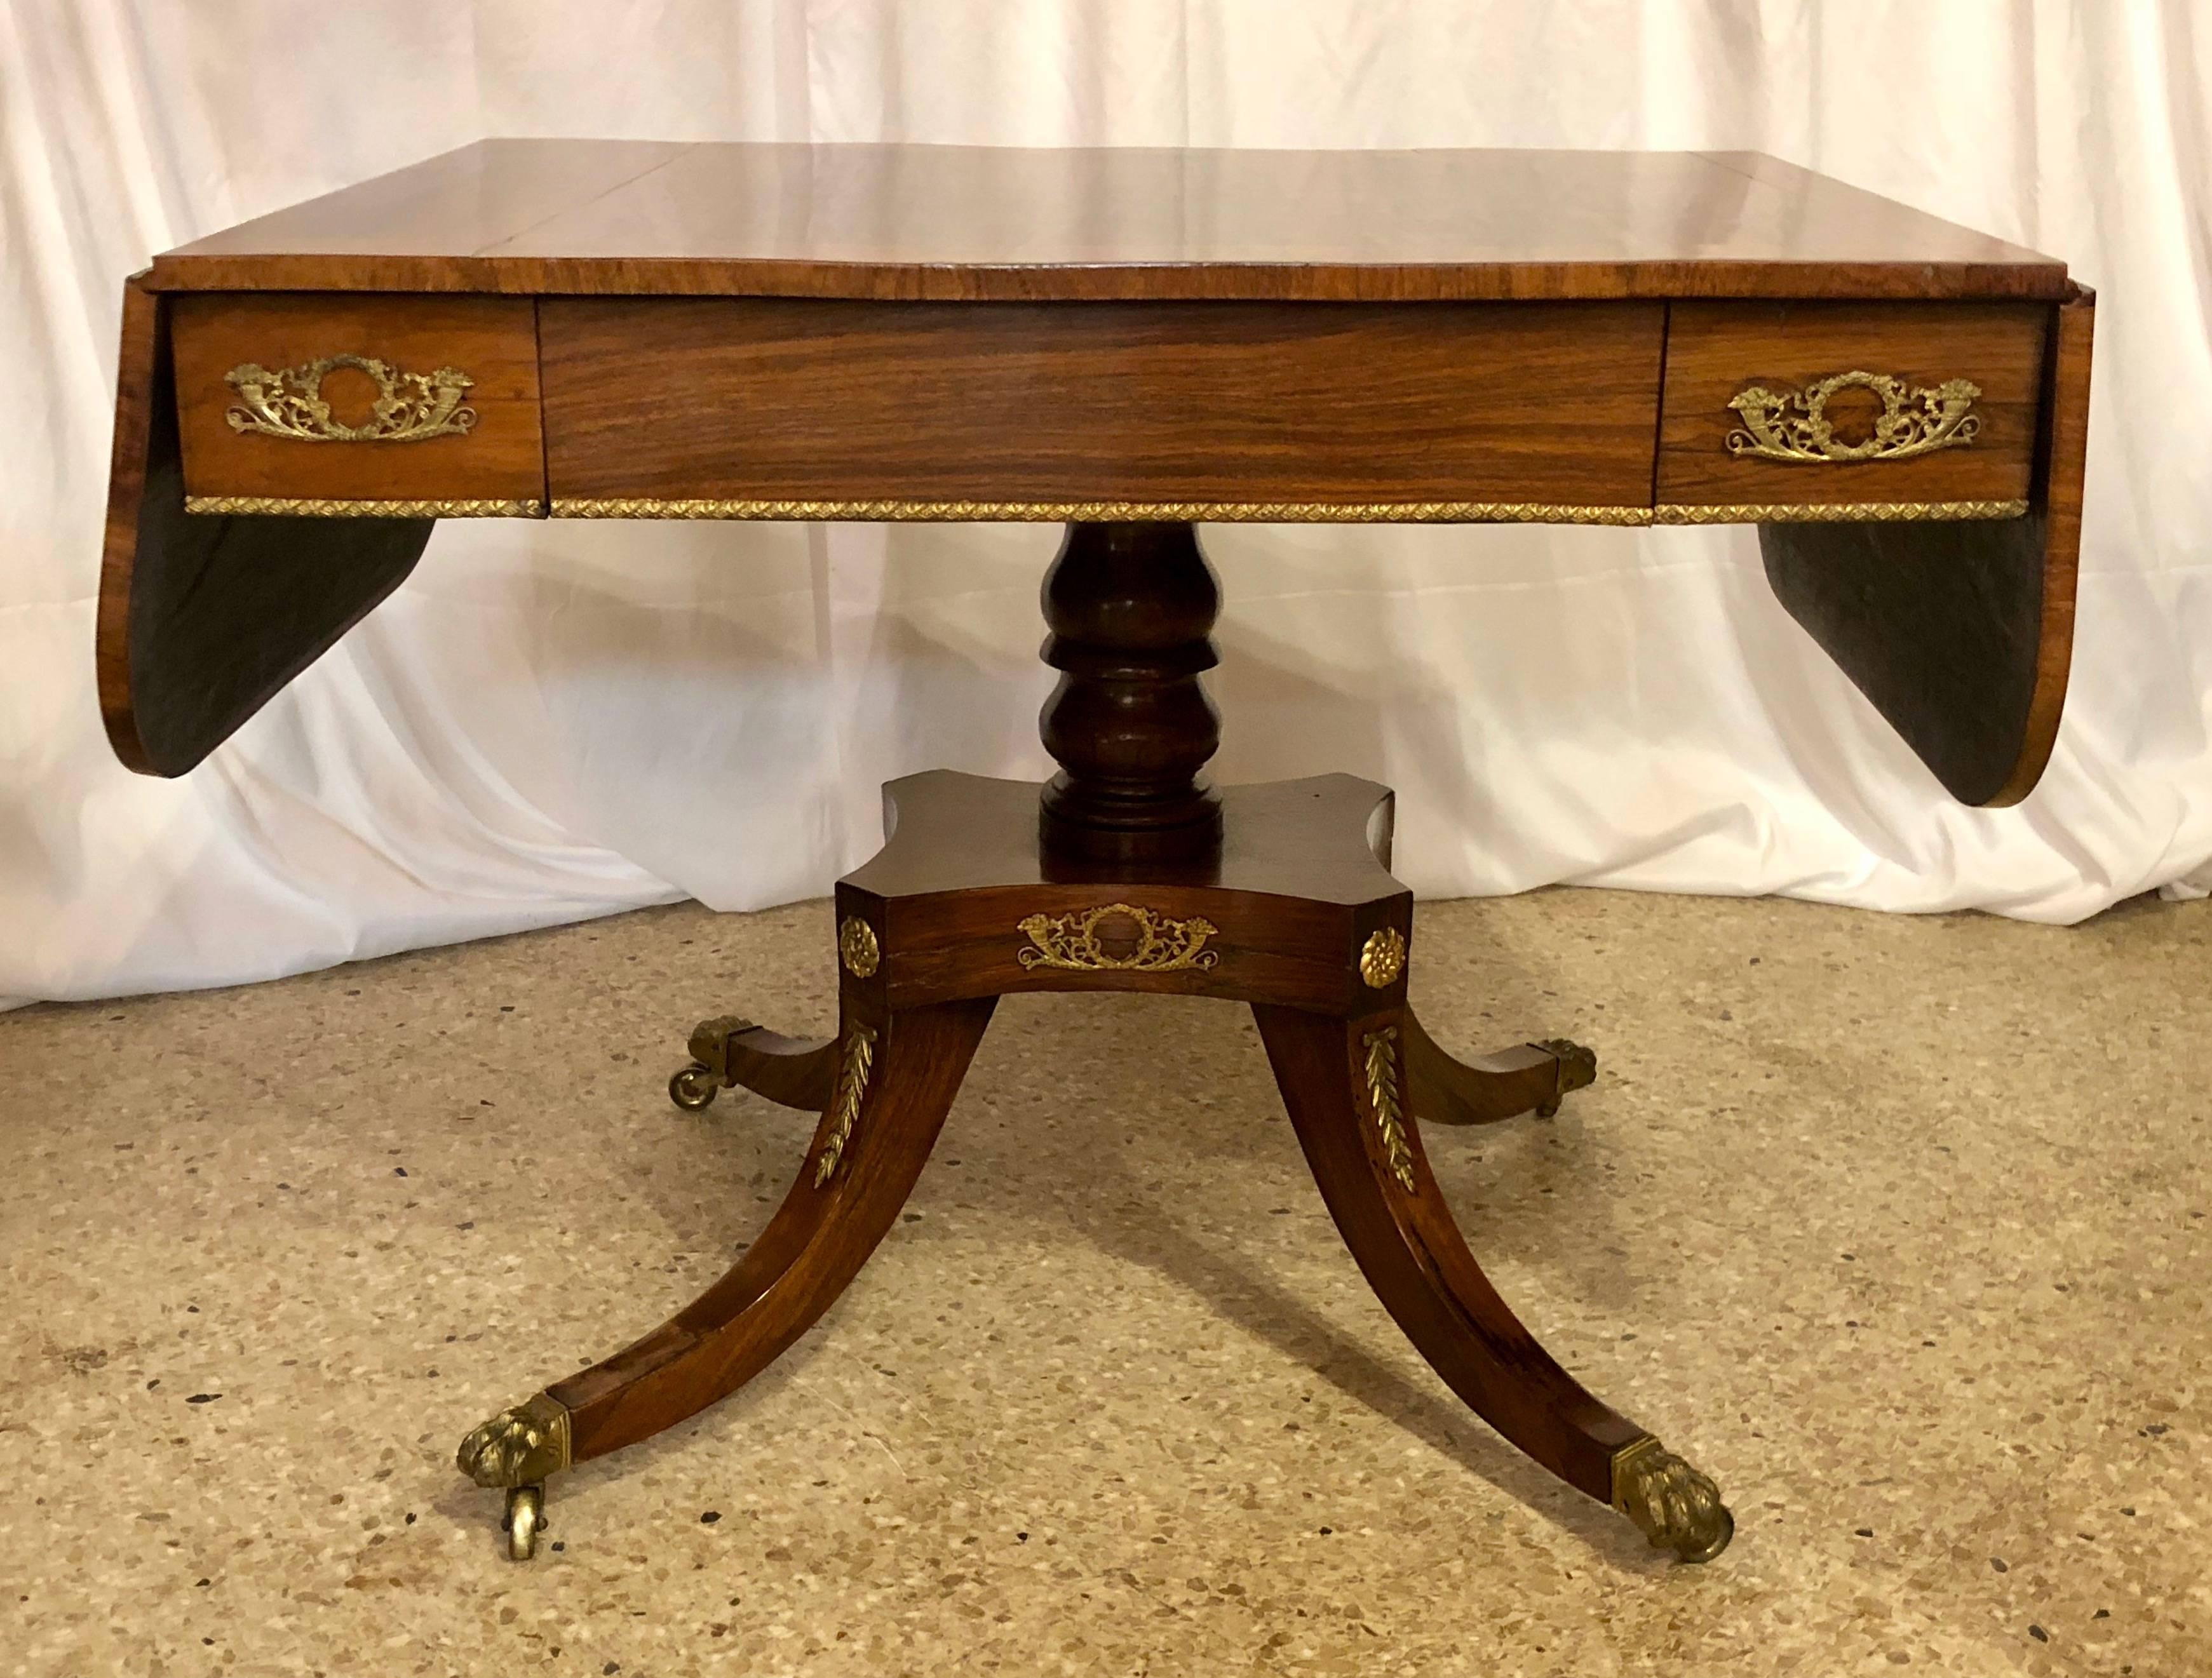 Antique rosewood Regency sofa table with satinwood trim, circa 1830-1840. This handsome table would make a wonderful addition any home. Rosewood is a magnificent wood.